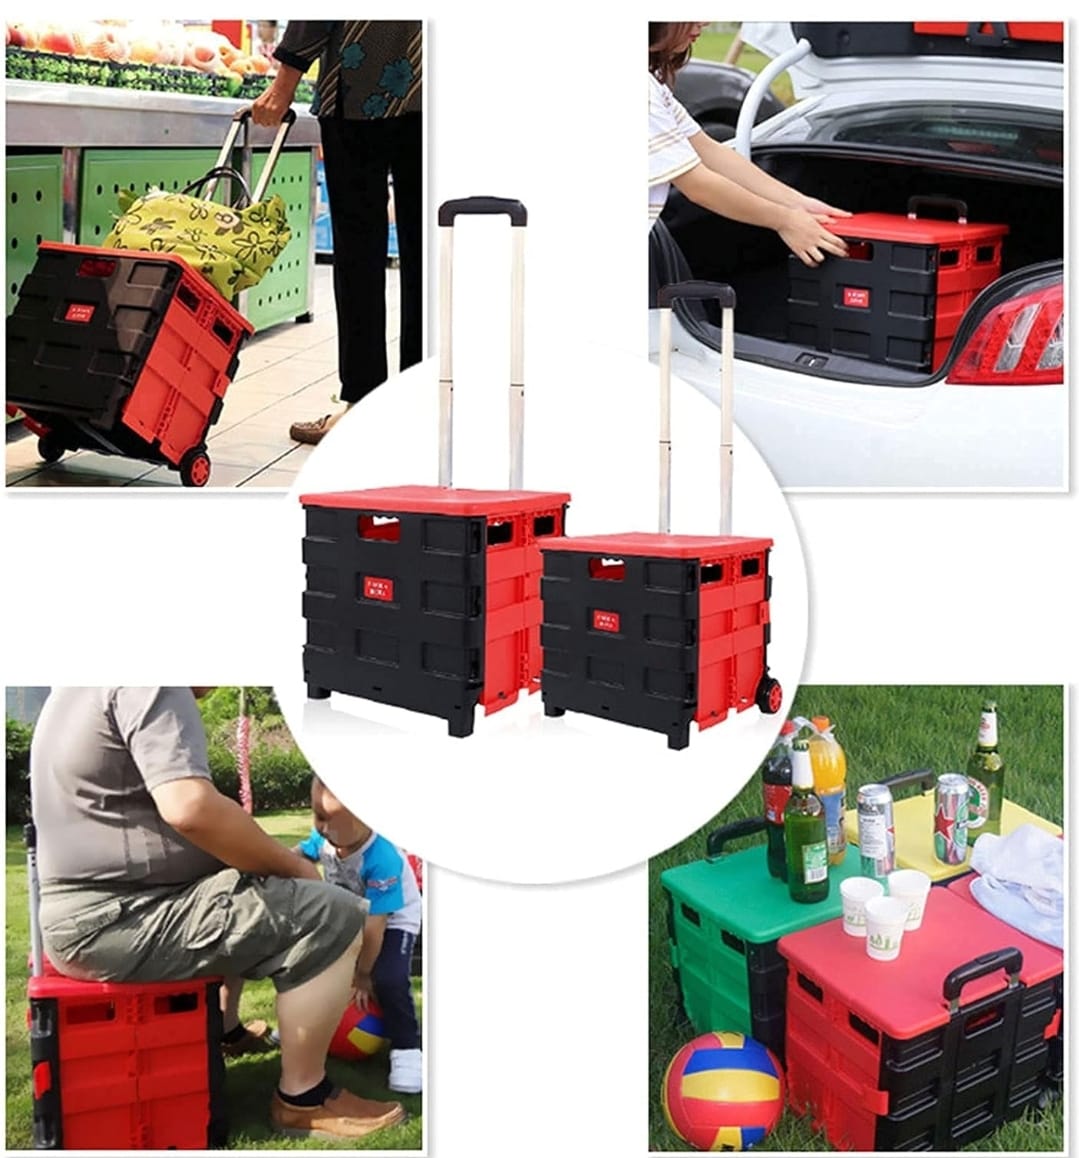 Multi Purpose Portable Shopping Trolley Cart with Wheels: 25kg Folding Cart for Grocery, Travel, Shopping & Camping